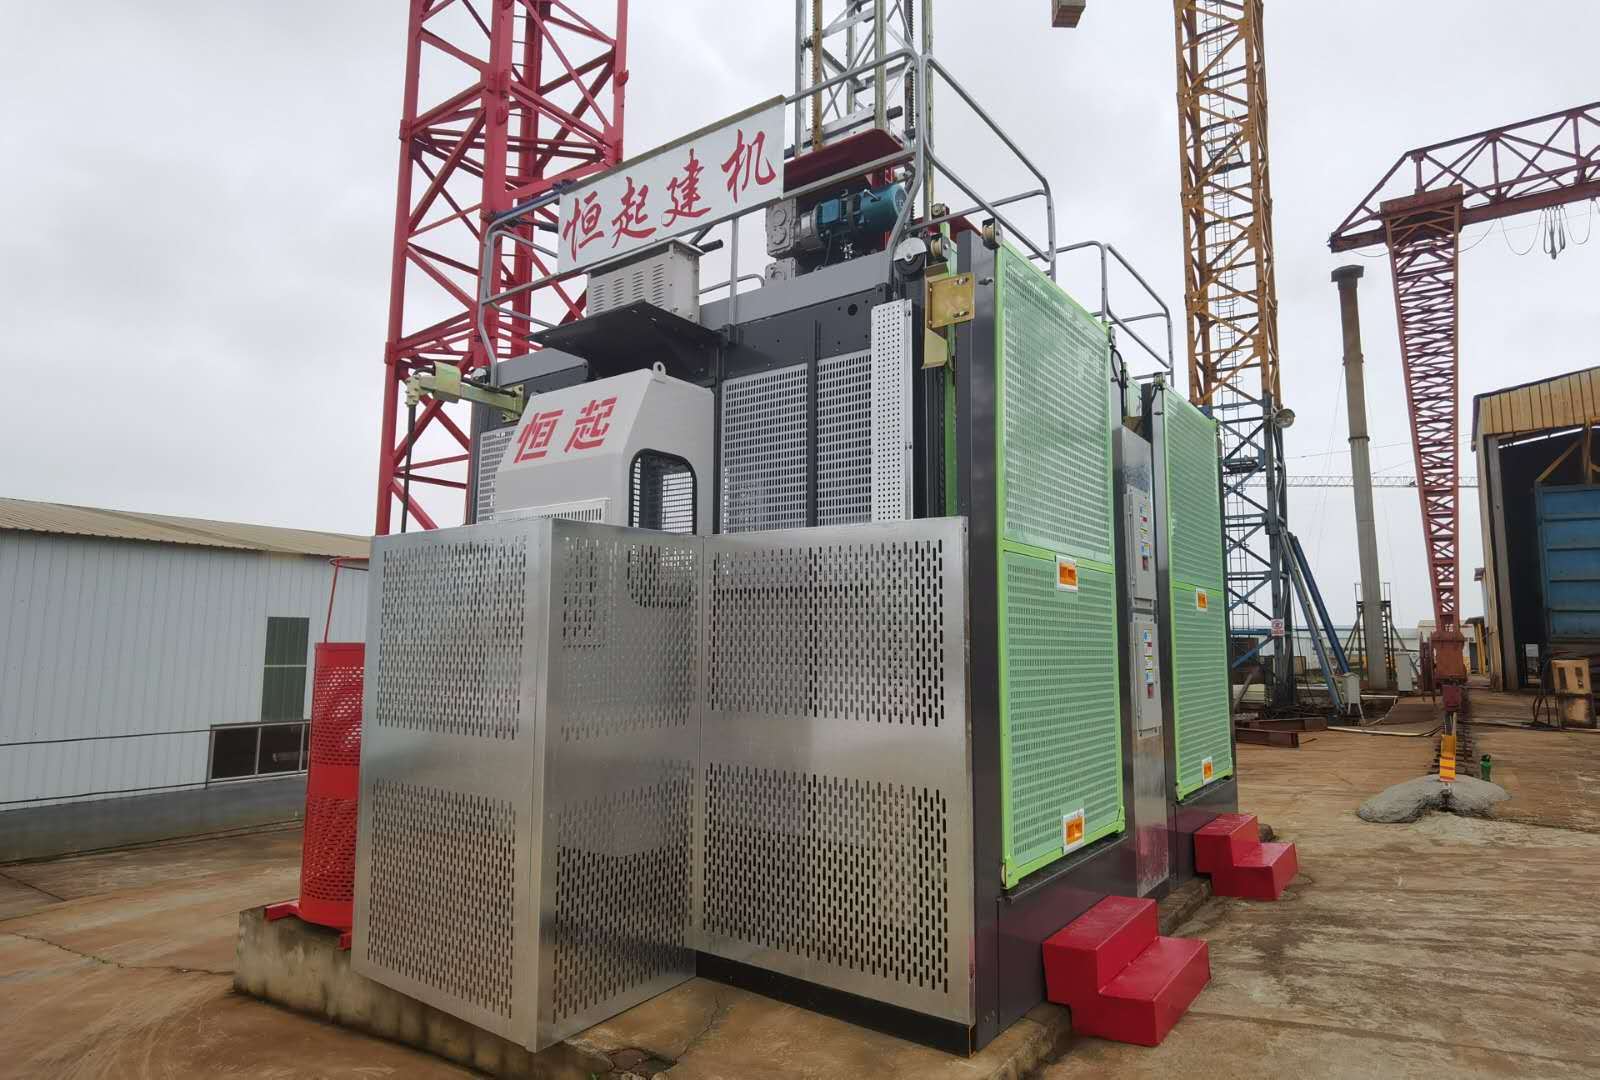 After research by the company's technical department, the appearance of the construction elevator was further transformed and innovated, and frequency conversion facilities were added to make the operation of the construction elevator more stable.